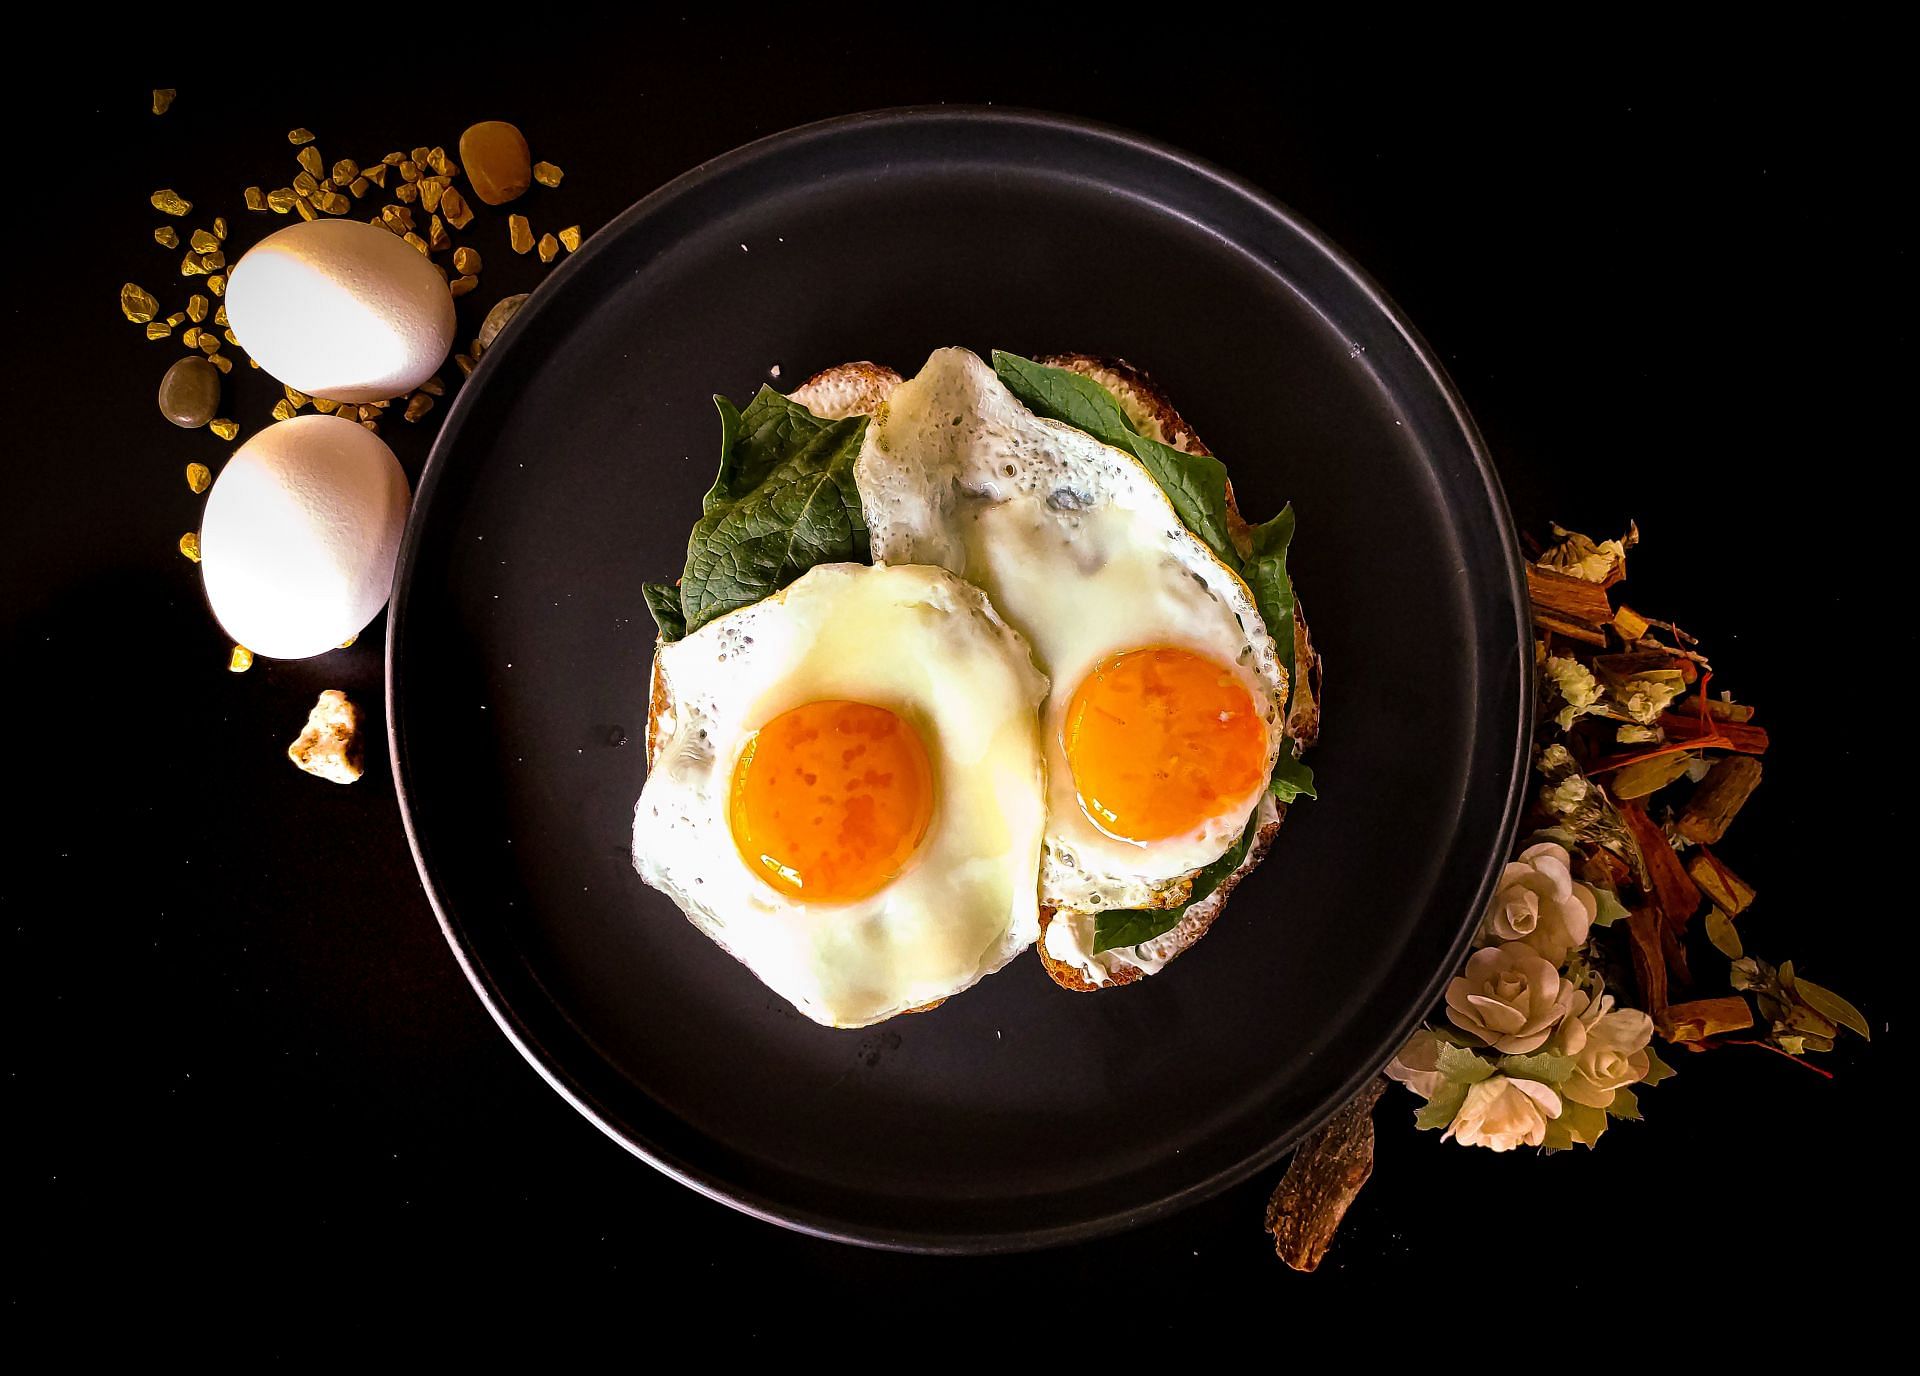 eggs are healthy sources of protein and nutrients. (Image via Unsplash / Coffeefy Worksafe)